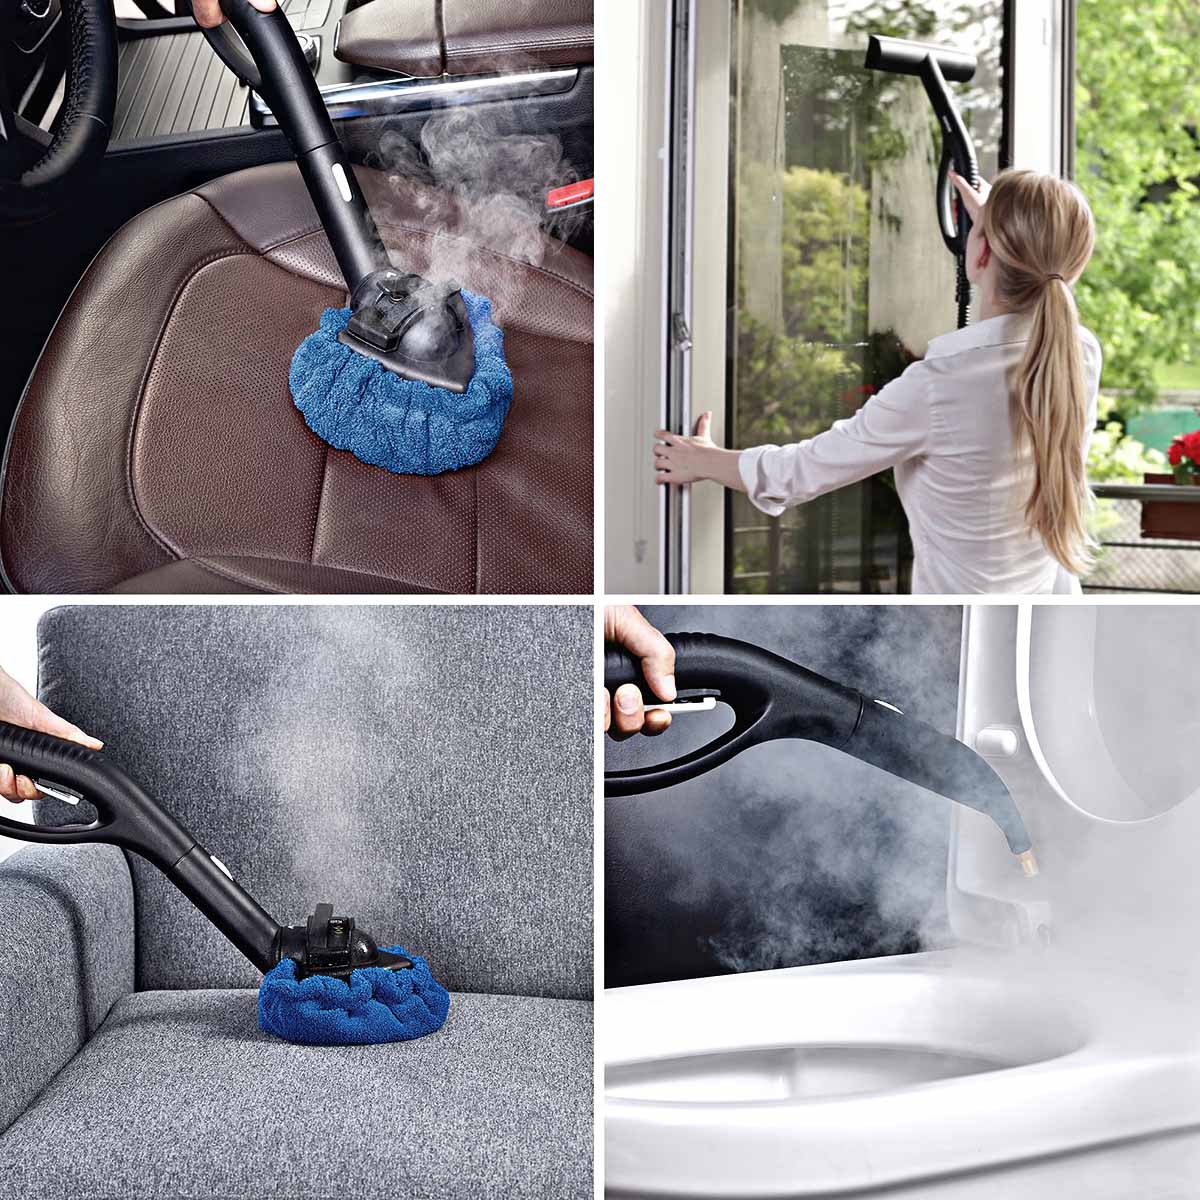 How To Use Dupray Neat Steam Cleaner